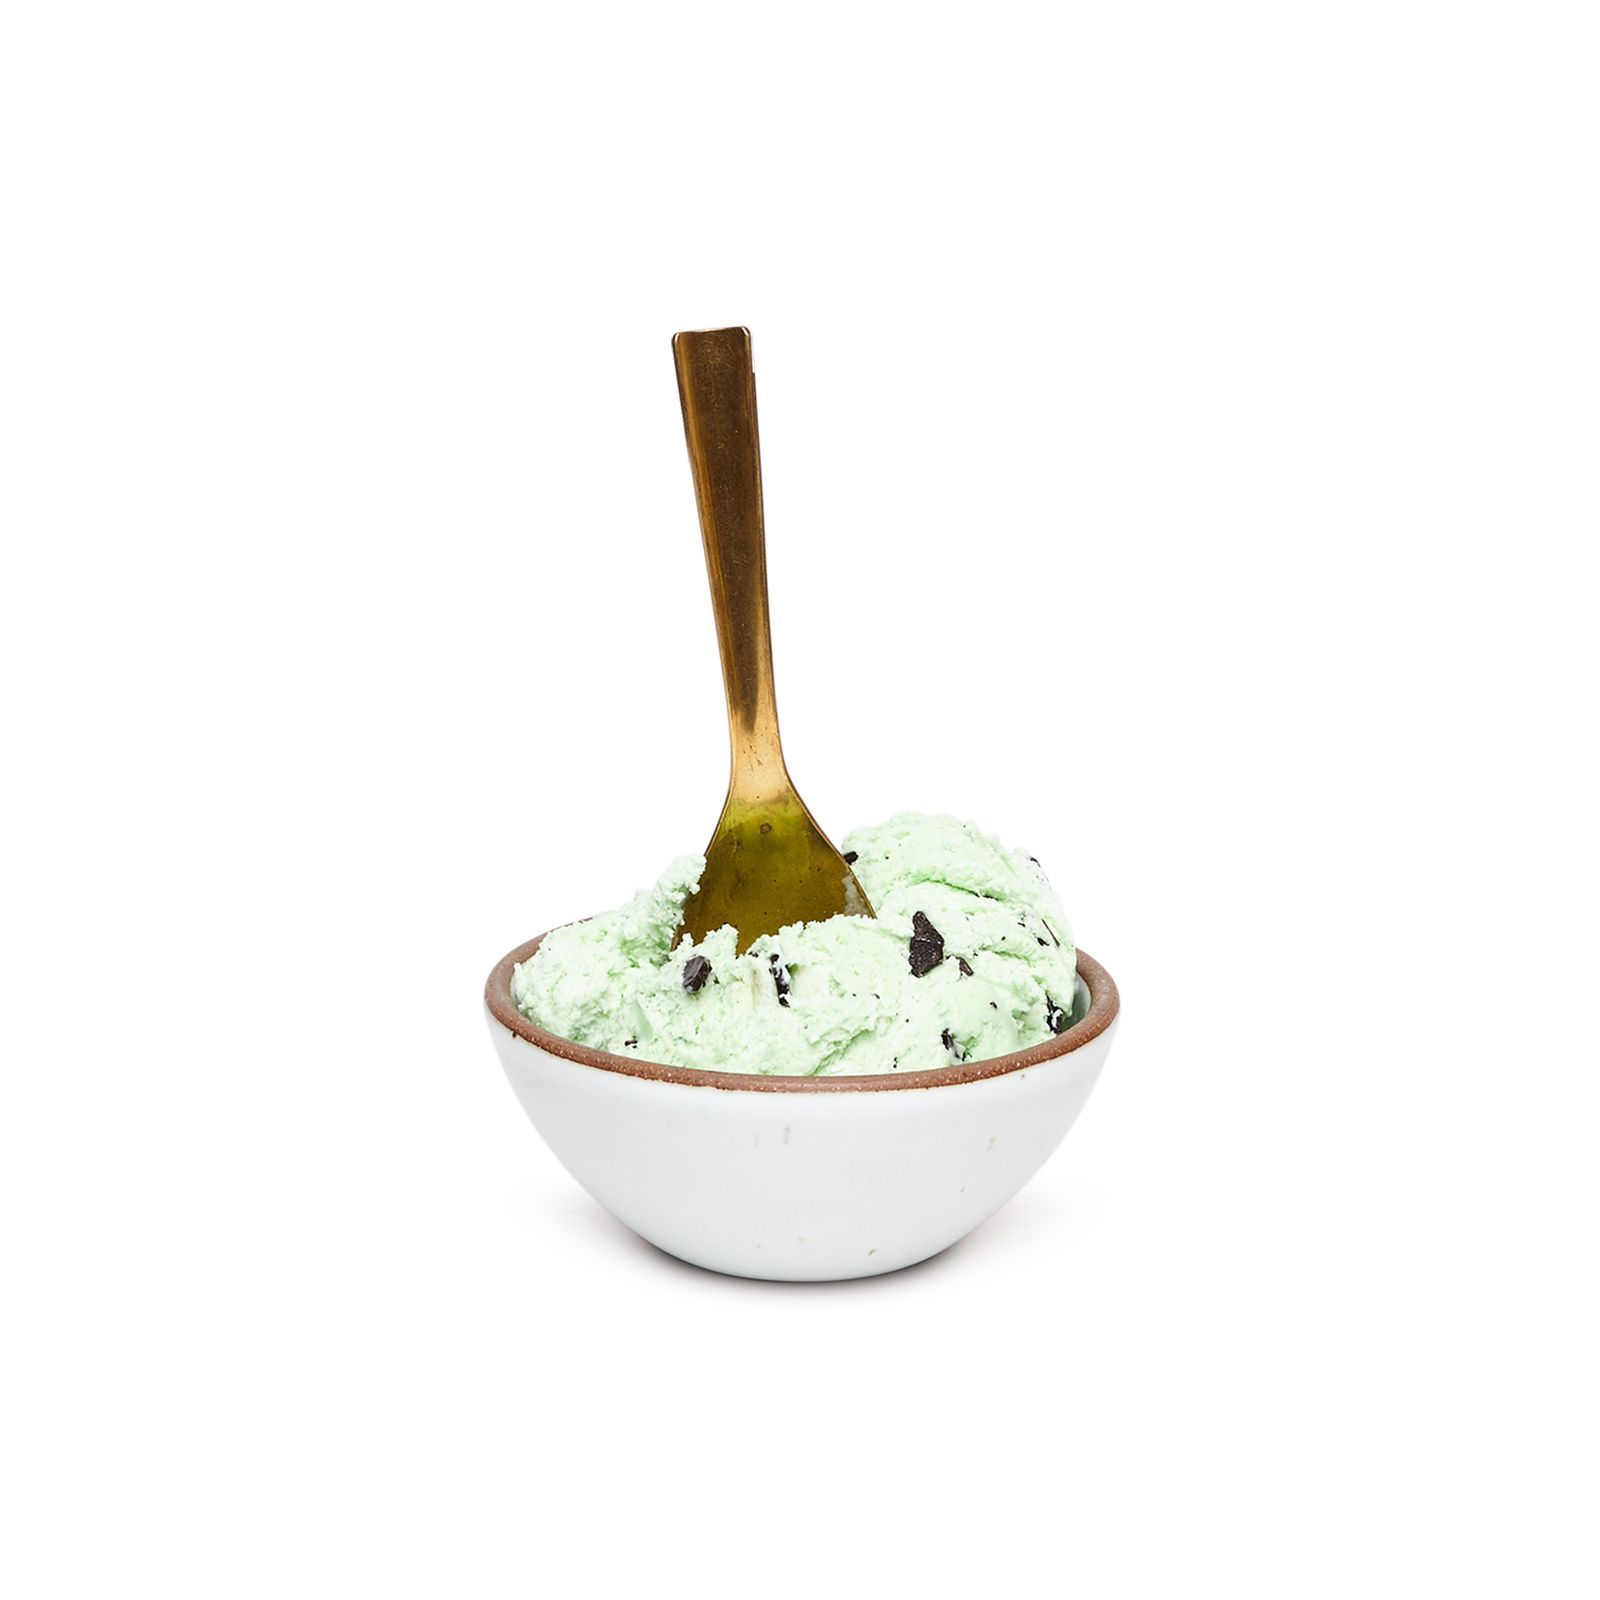 Two perfect scoops of mint chocolate chip ice cream with a brass spoon poking out the top. Yum.